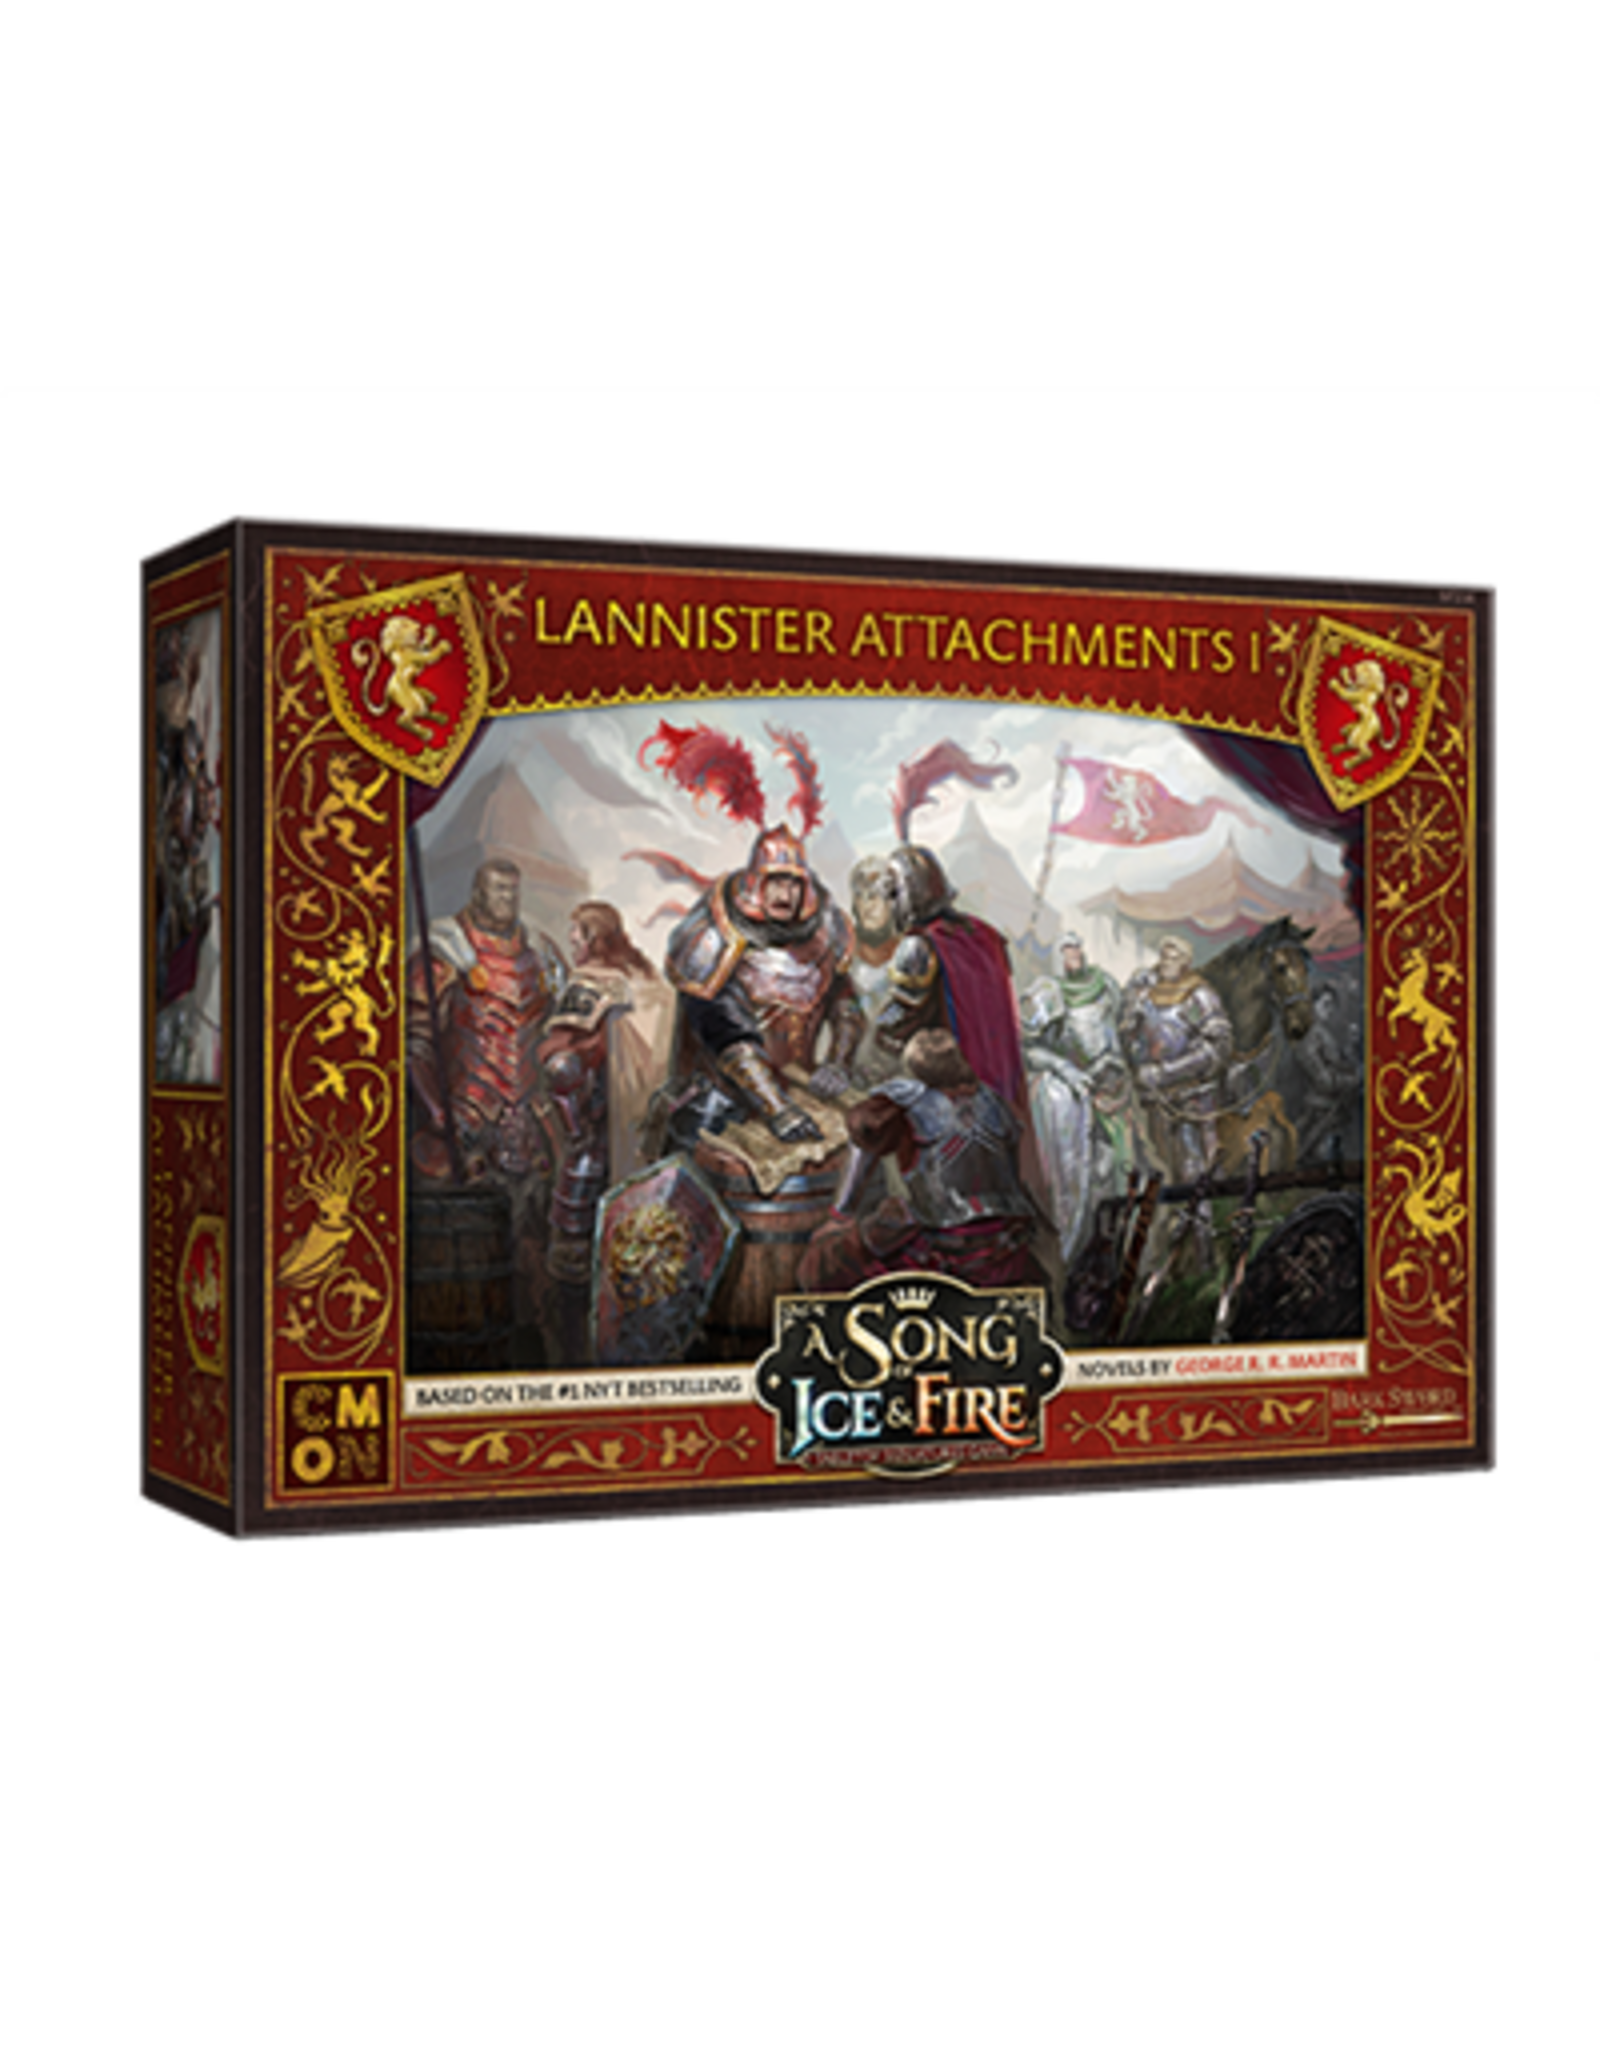 Cool Mini or Not A Song of Ice & Fire: Lannister Attachments #1